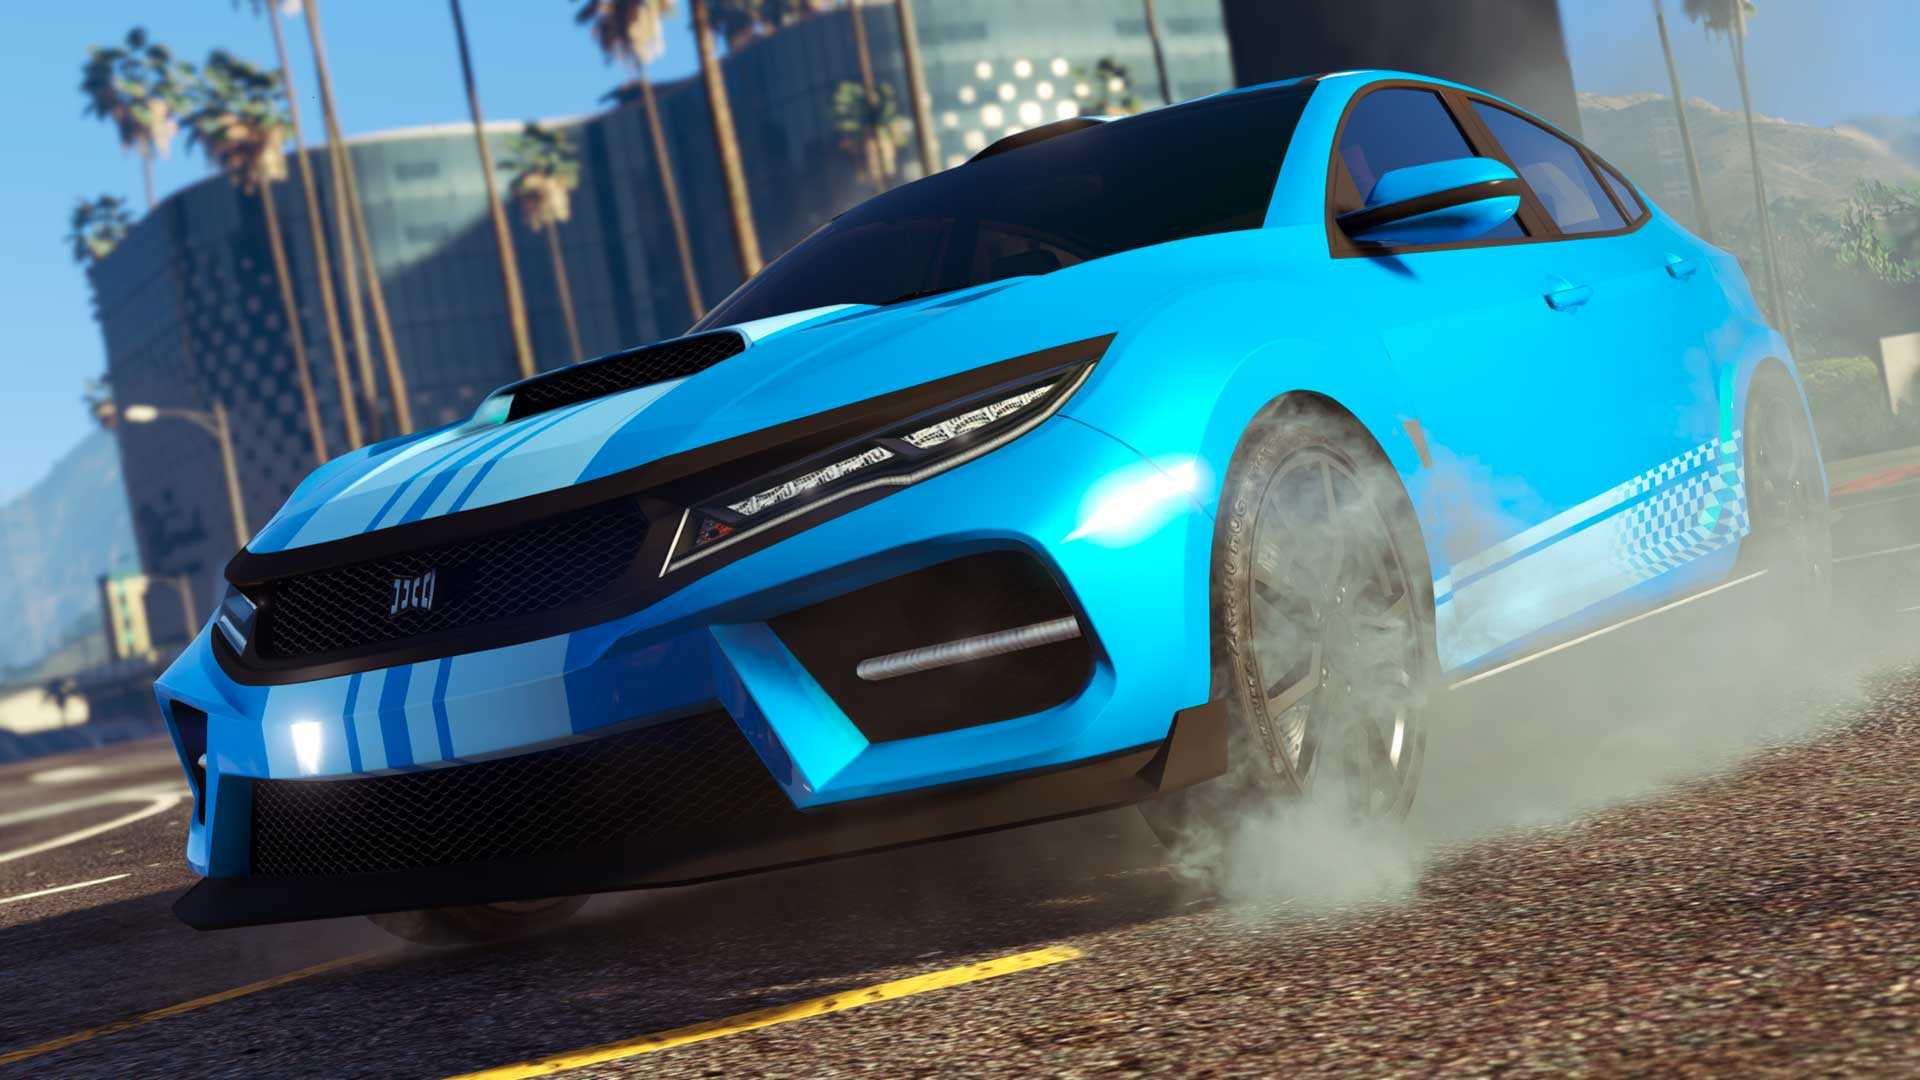 Gta online fastest cars: the best for top speed & lap times in 2021